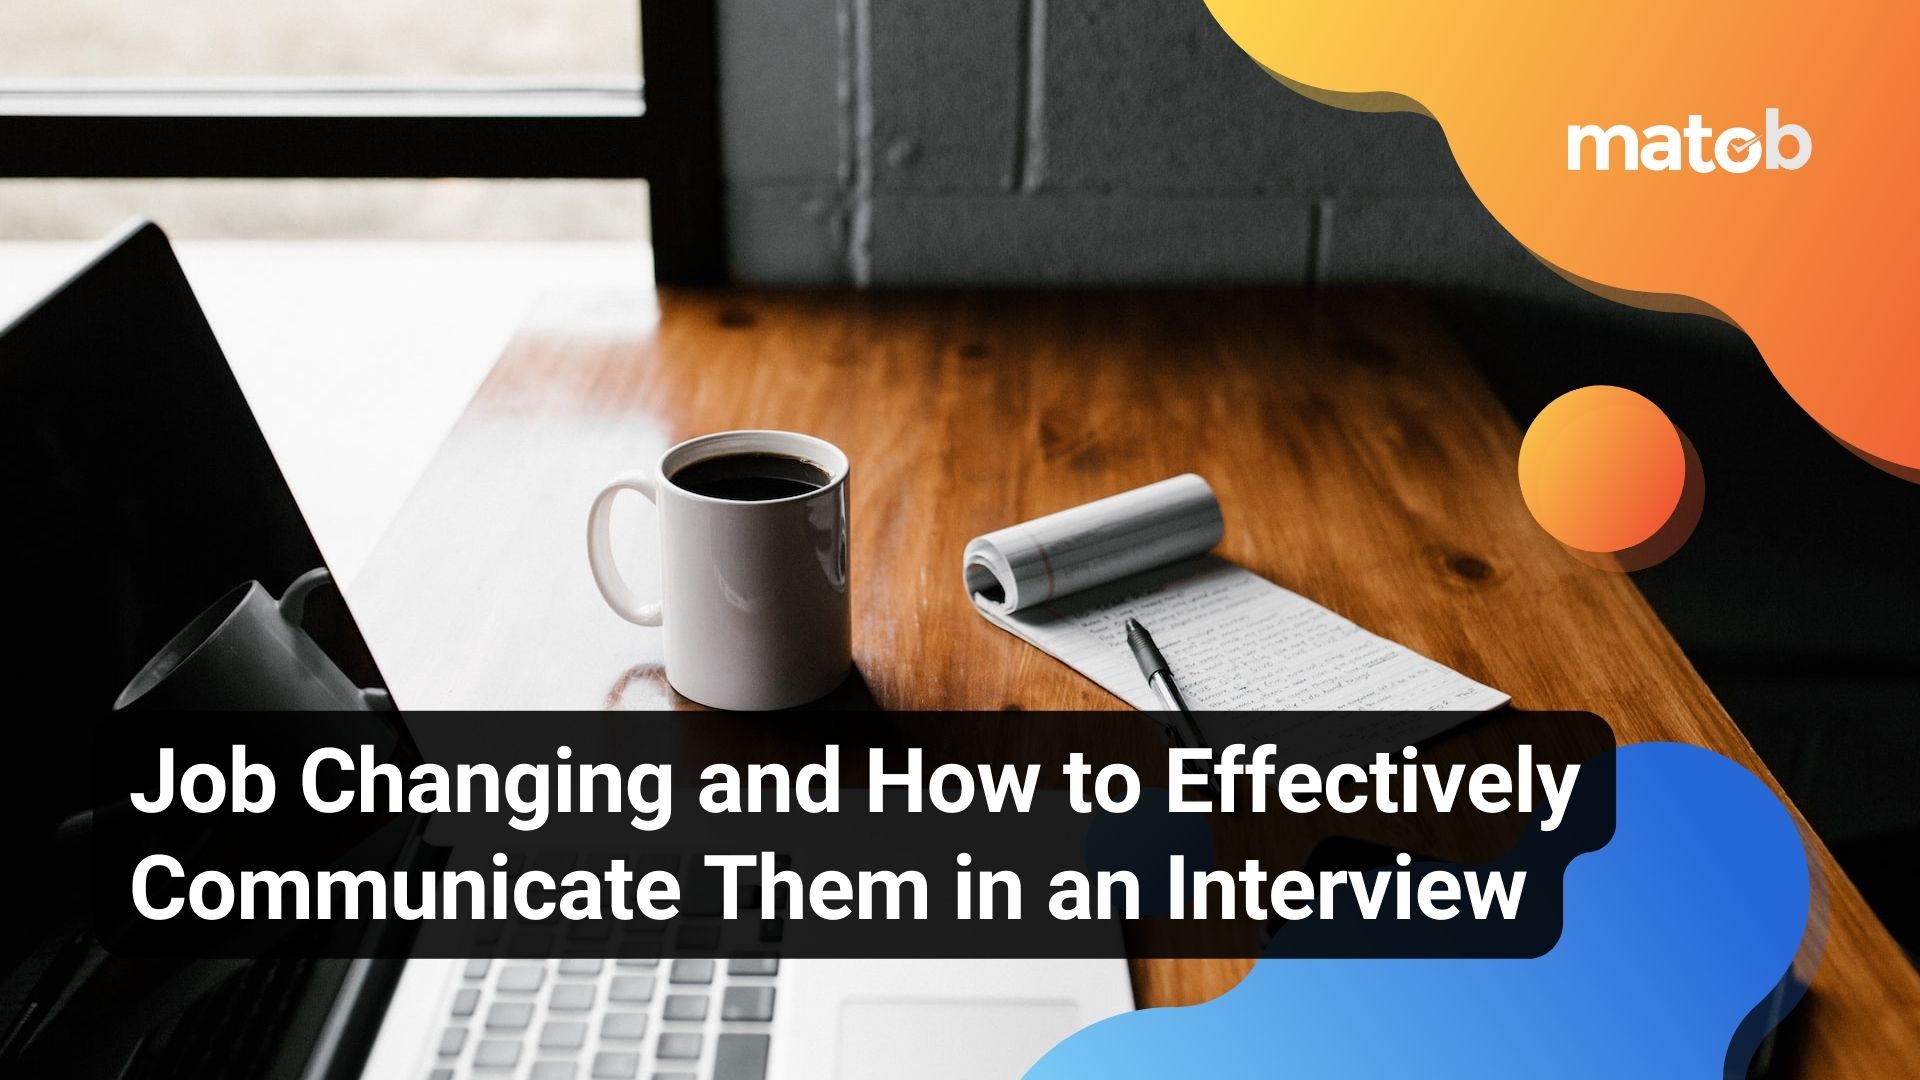 Job Changing and How to Effectively Communicate Them in an Interview